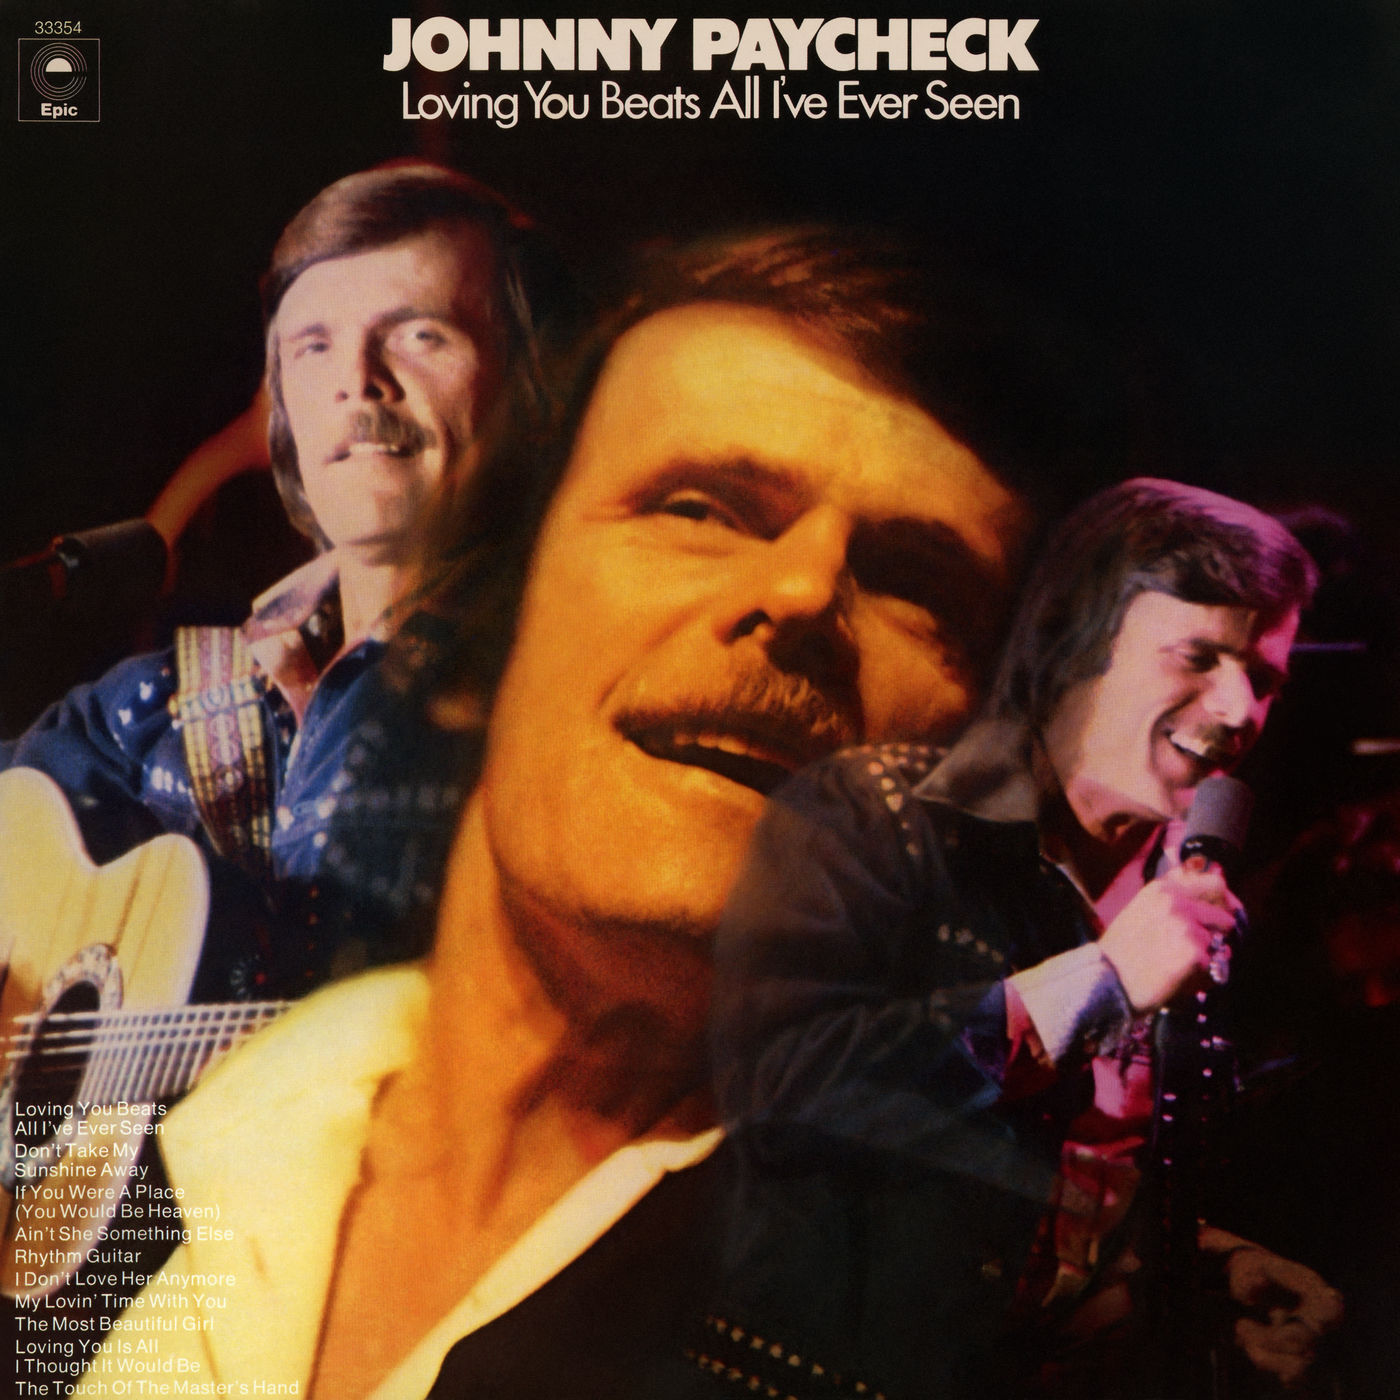 Johnny Paycheck – Loving You Beats All I’ve Ever Seen